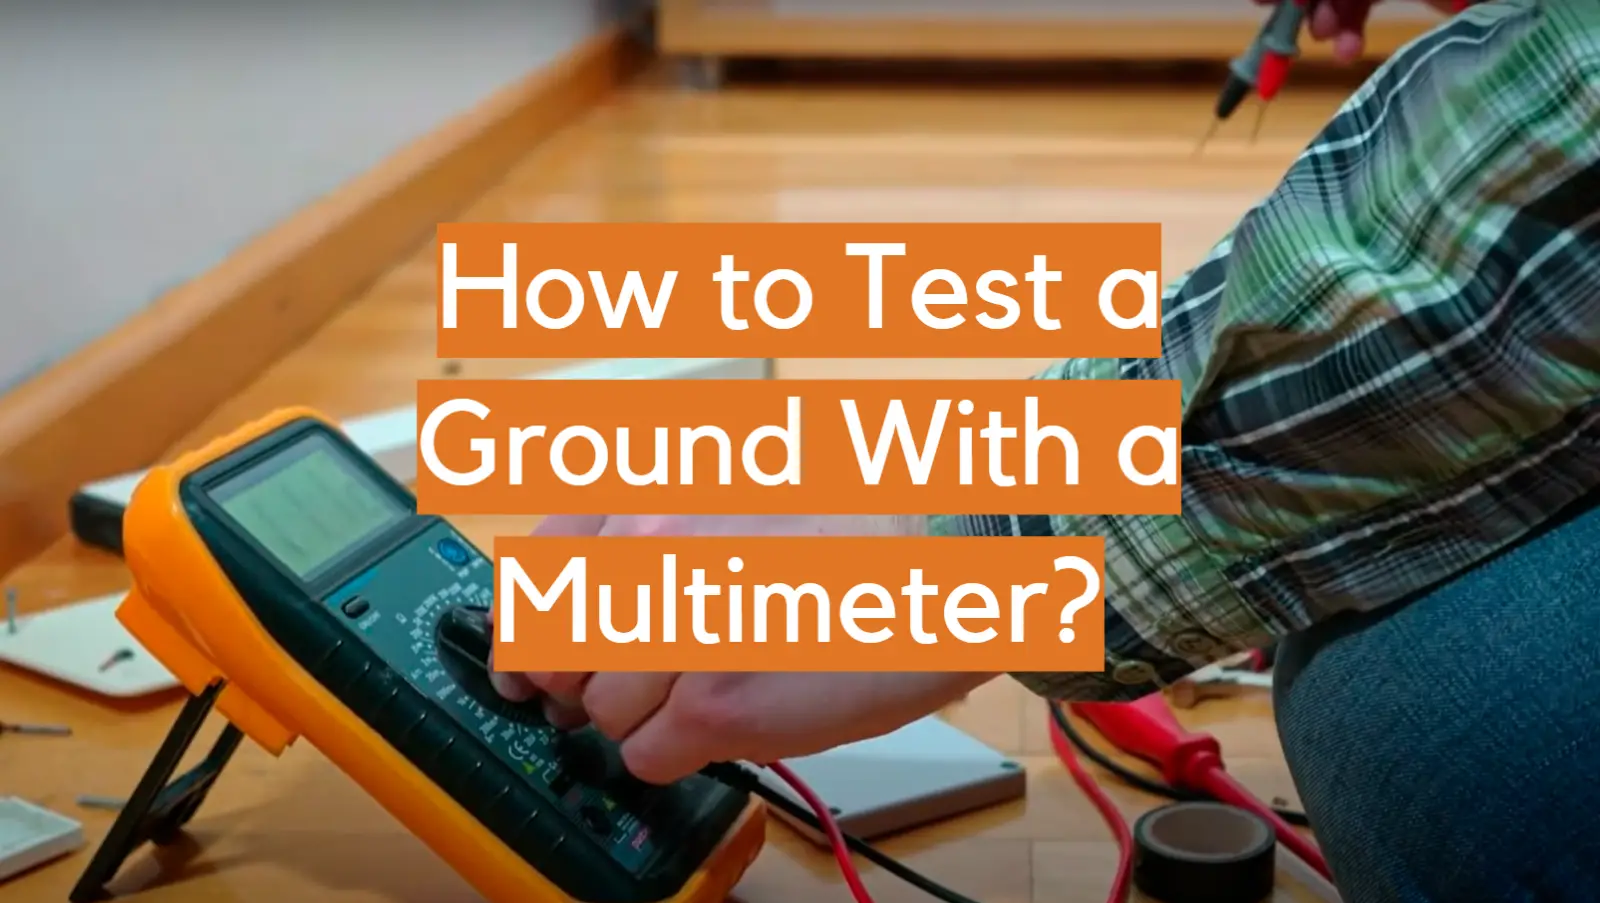 How to Test a Ground With a Multimeter?